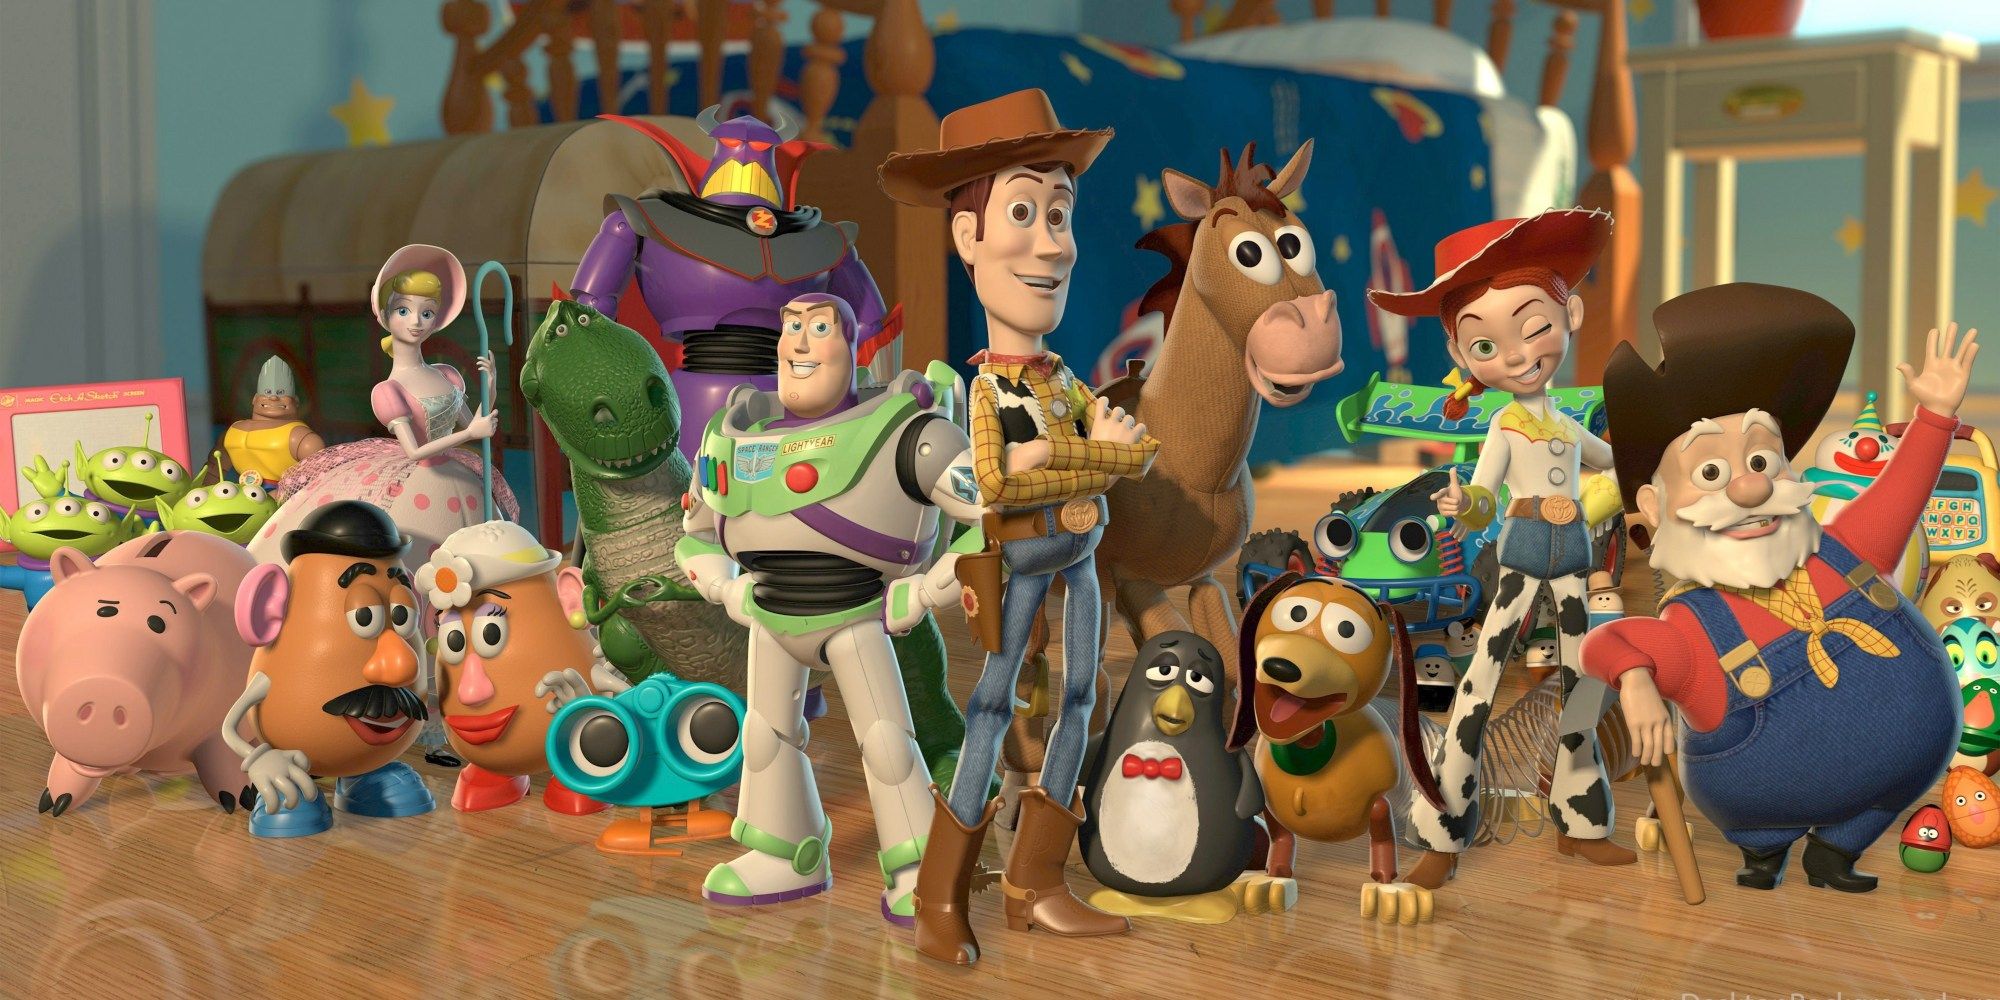 The gang in Toy Story 2